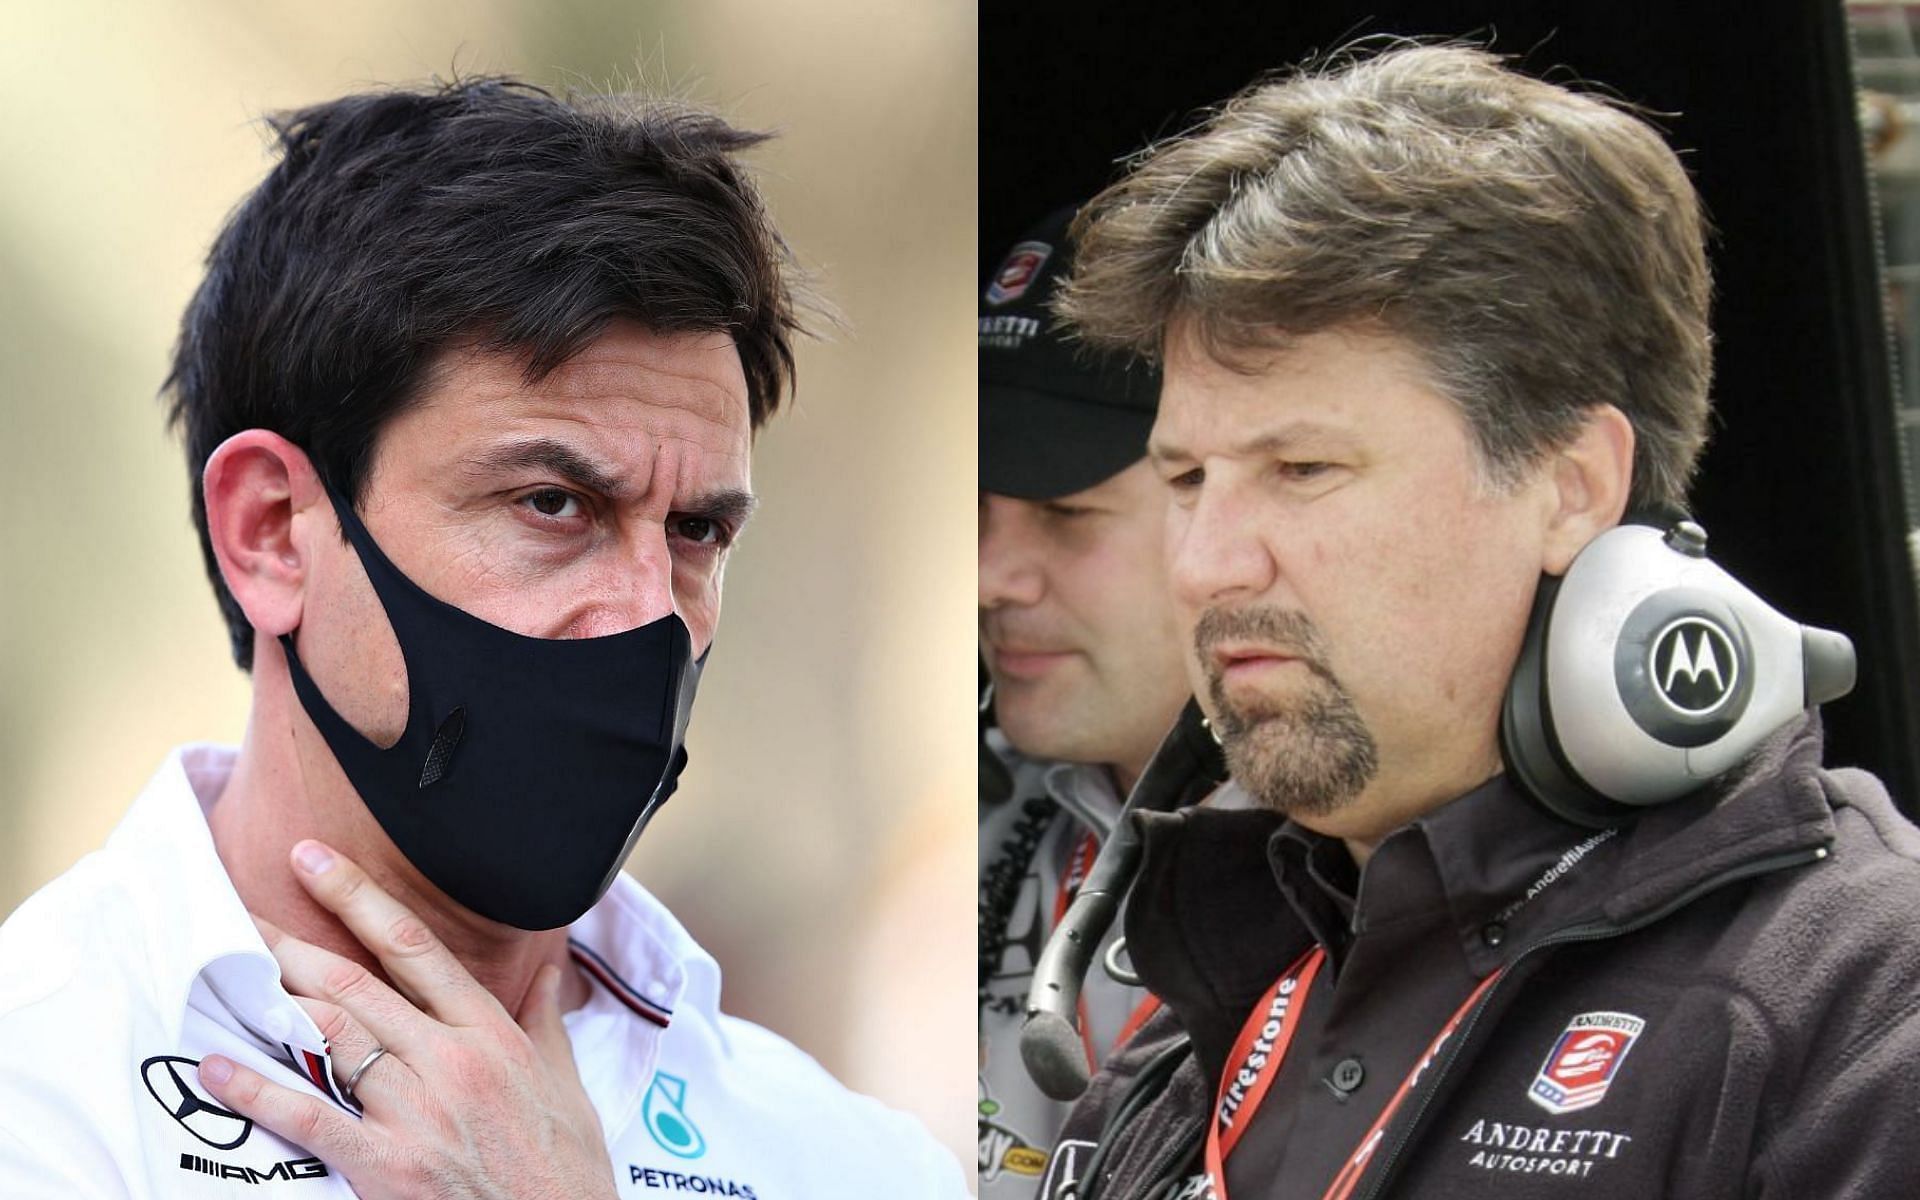 Toto Wolff (left) wants Andretti Autosport to prove its worthiness to enter F1